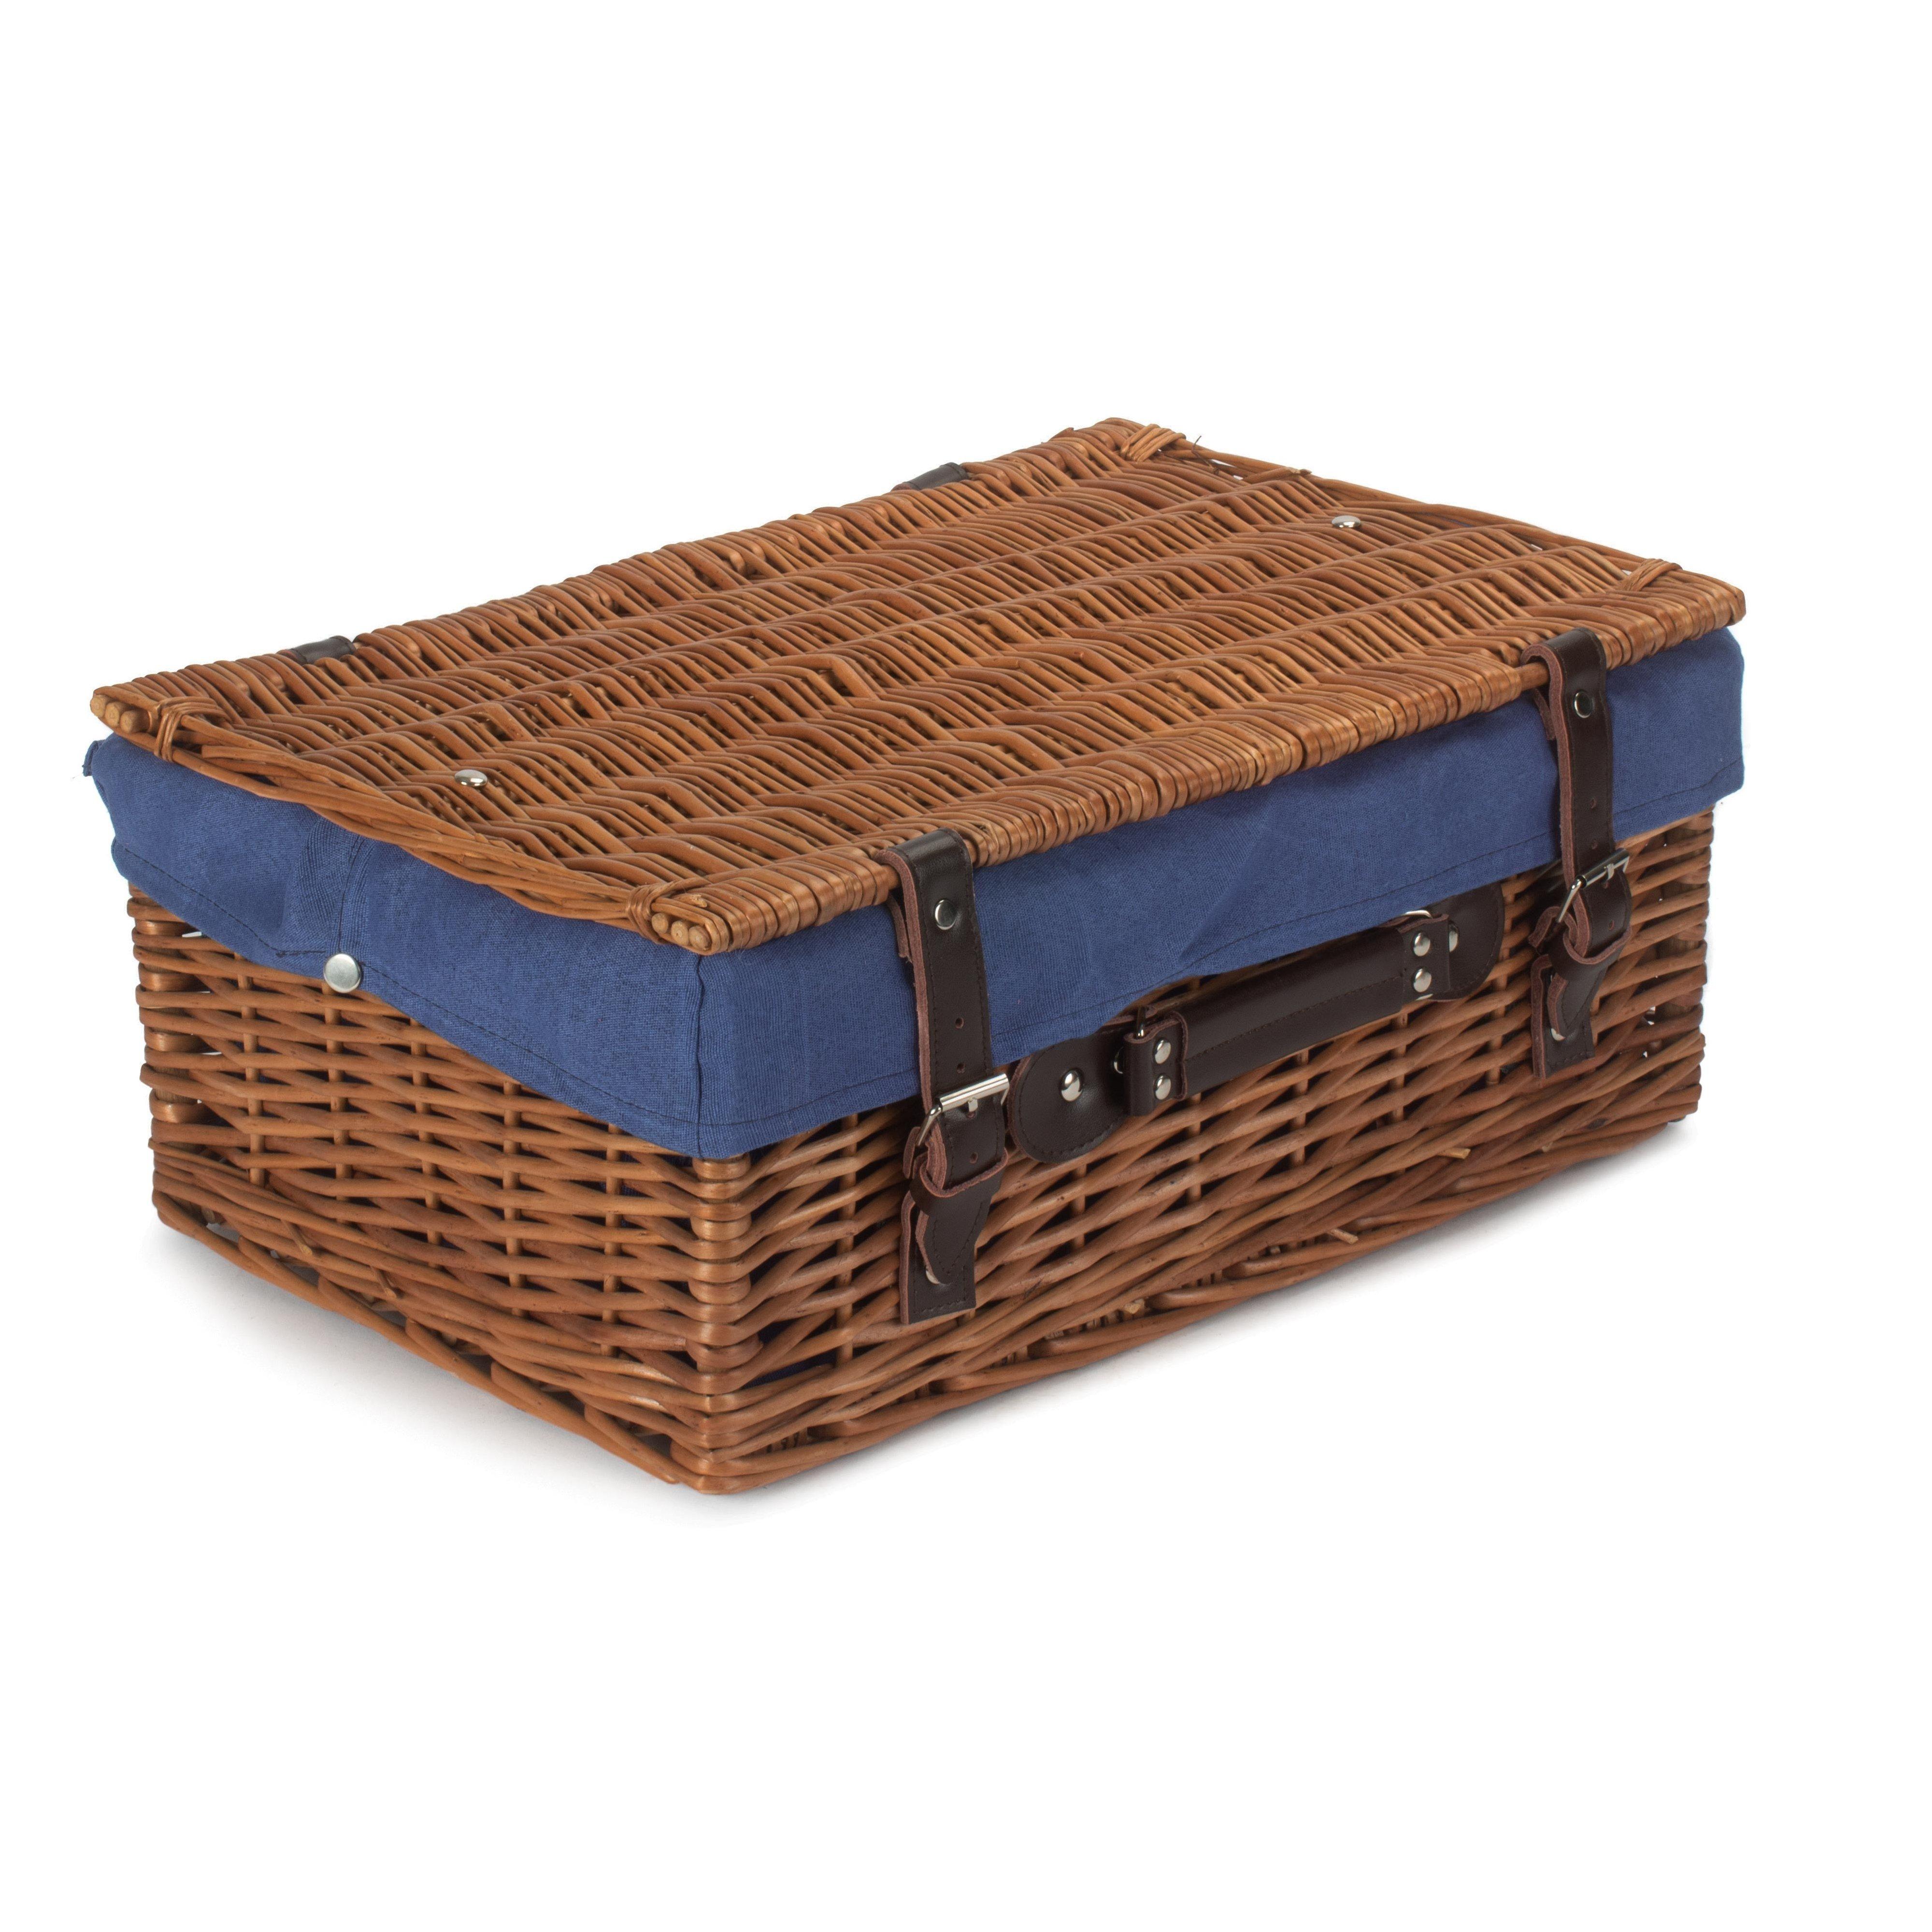 Wicker 46cm Double Steamed Picnic Basket with Cotton Lining